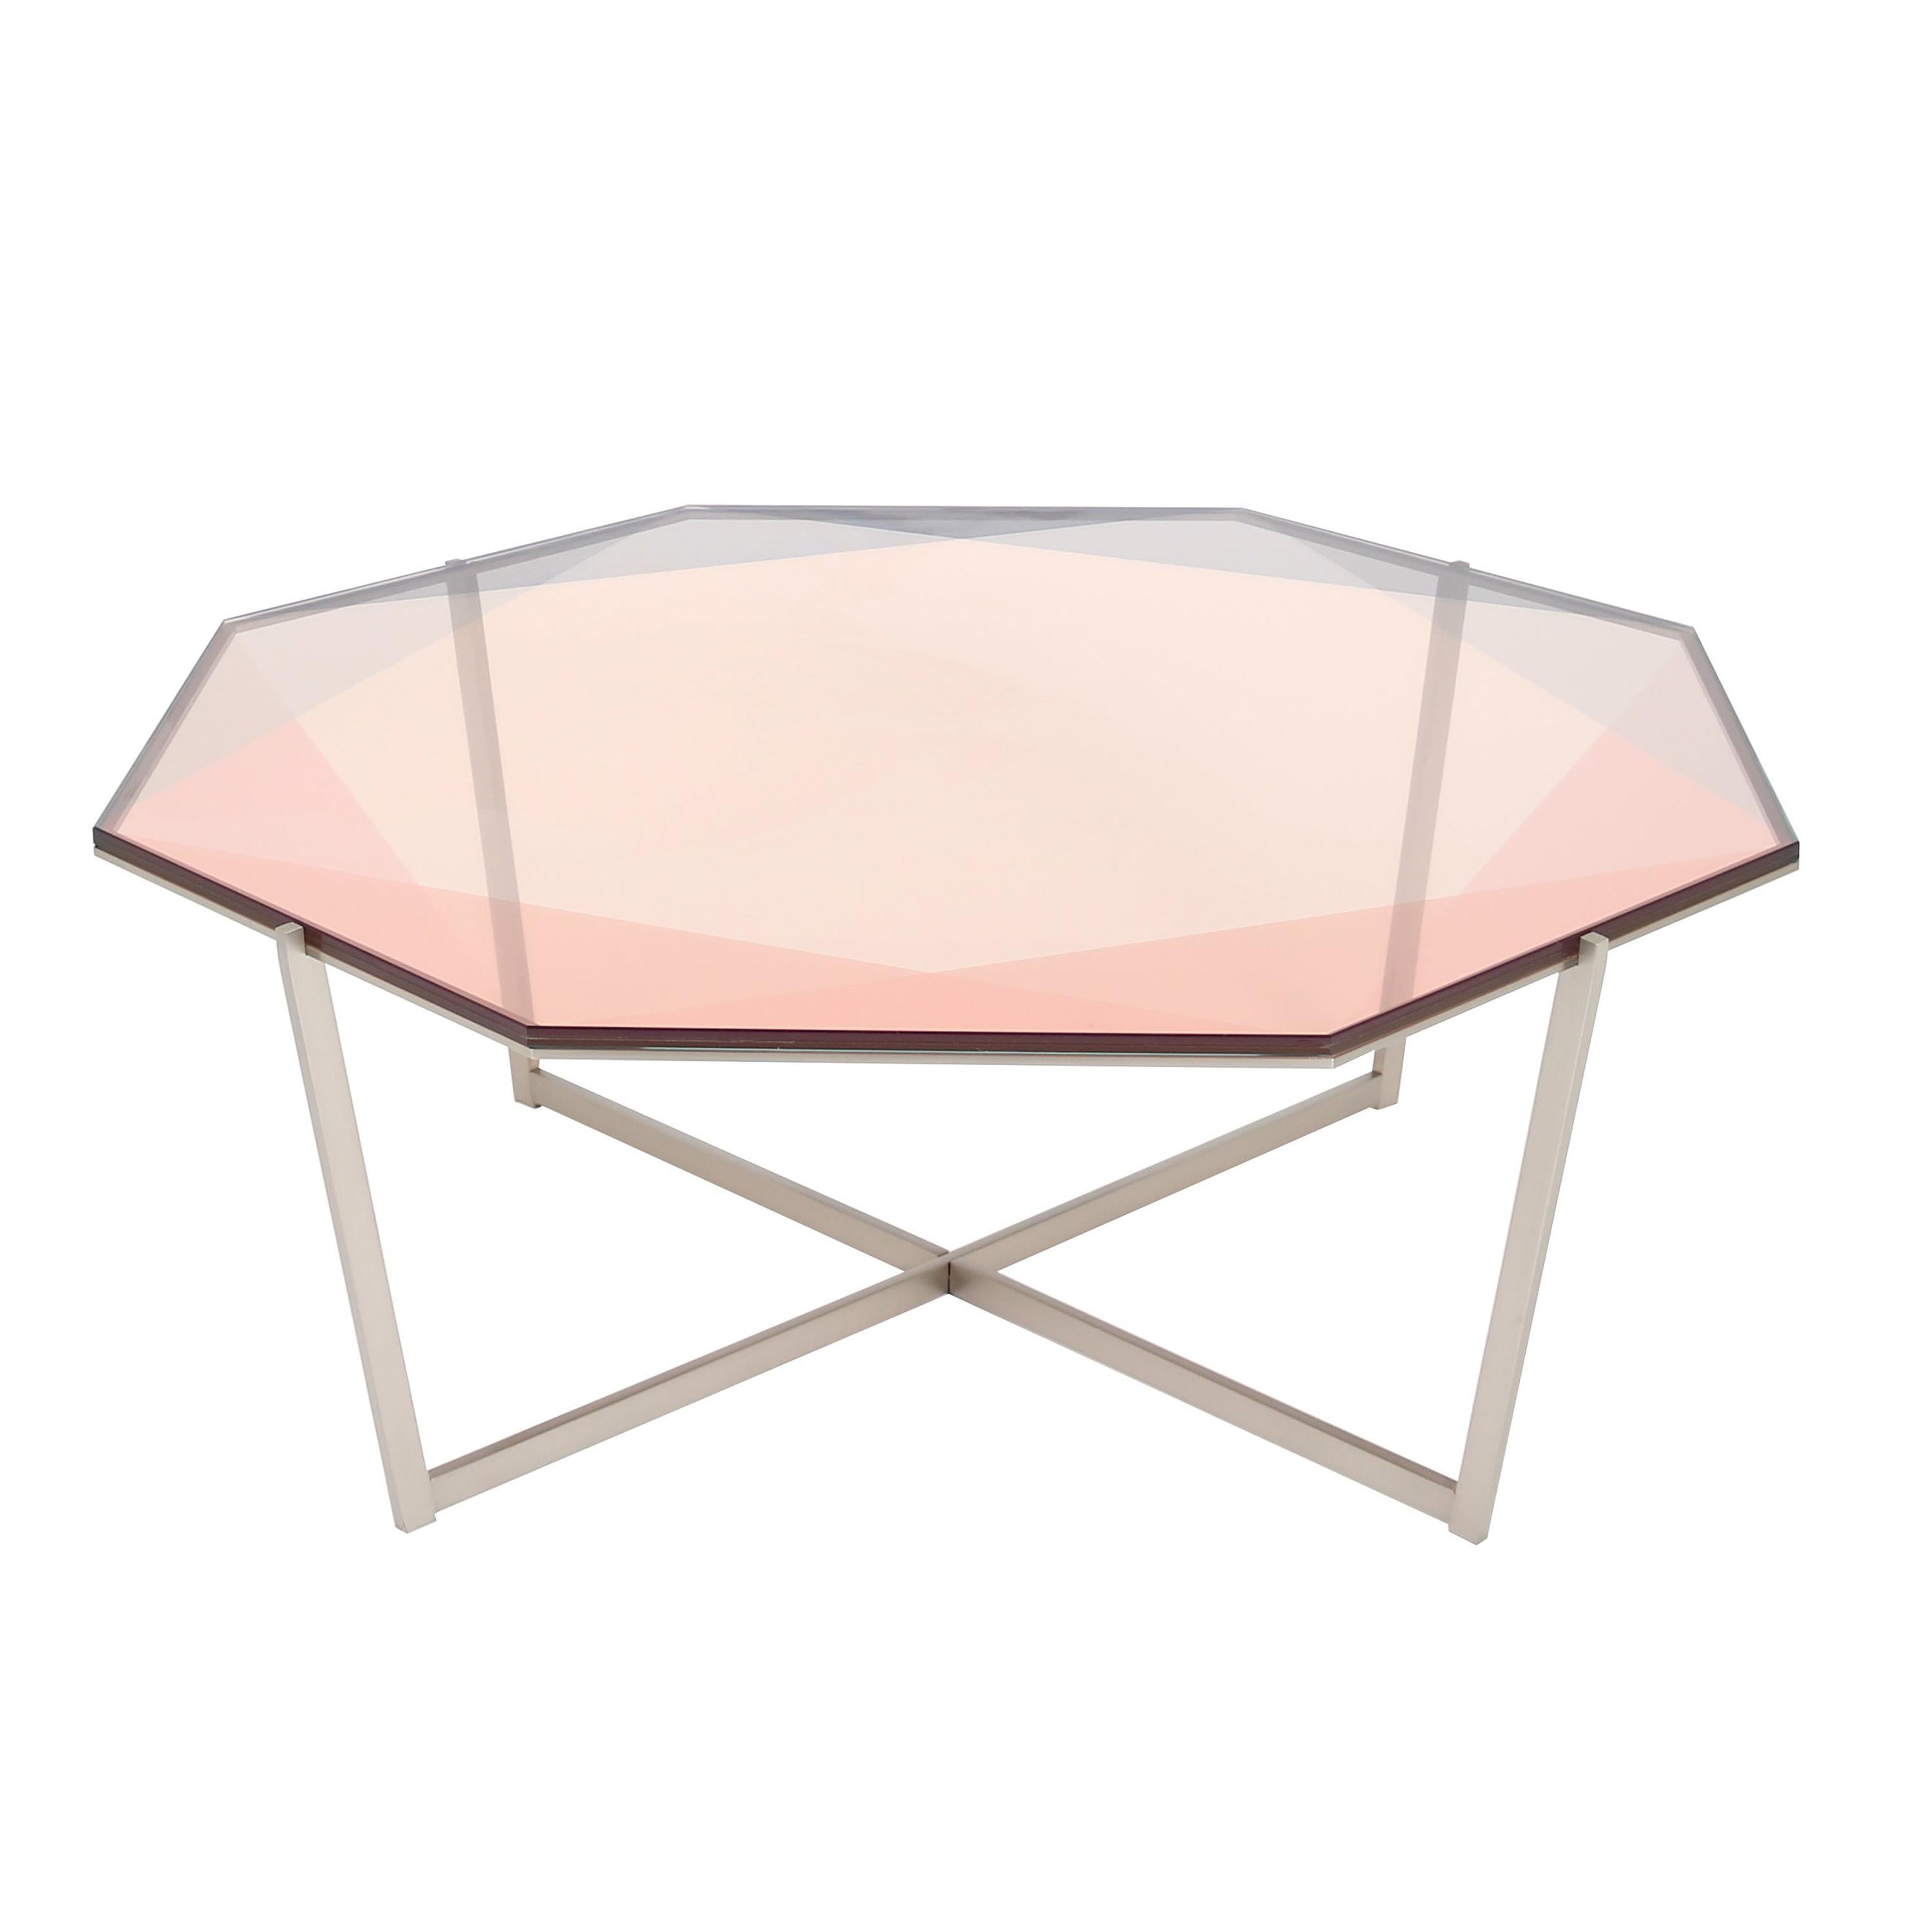 Gem Octagonal Coffee Table-Blush Glass with Stainless Steel Base by Debra Folz For Sale